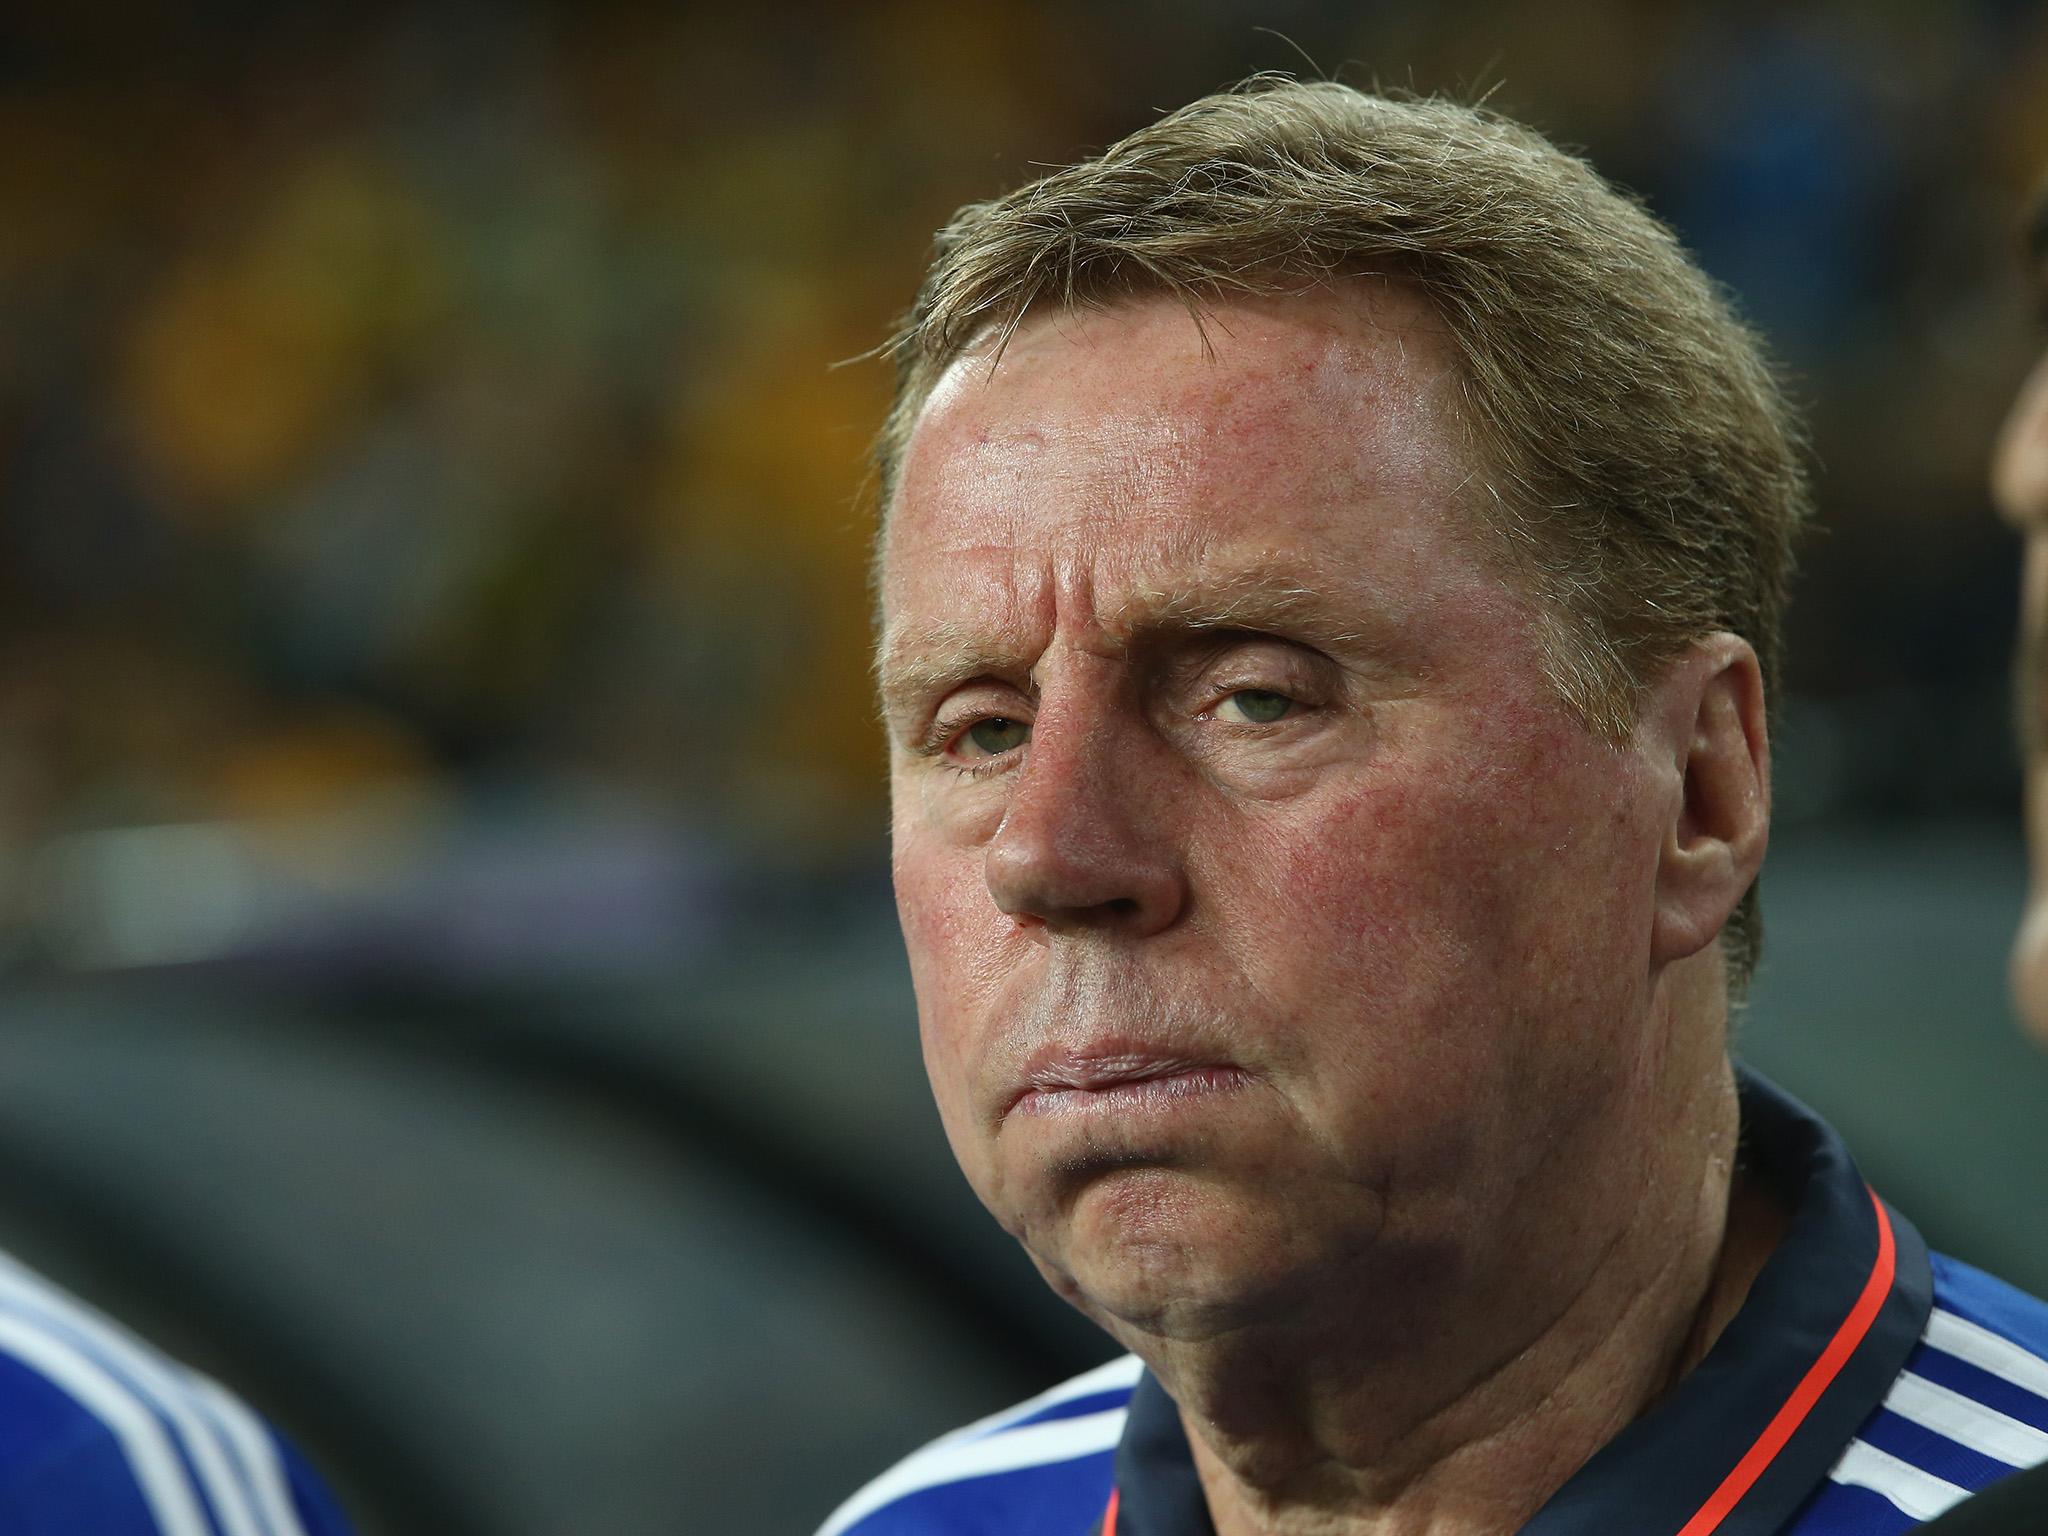 &#13;
Harry Redknapp takes over at Birmingham City (Getty)&#13;